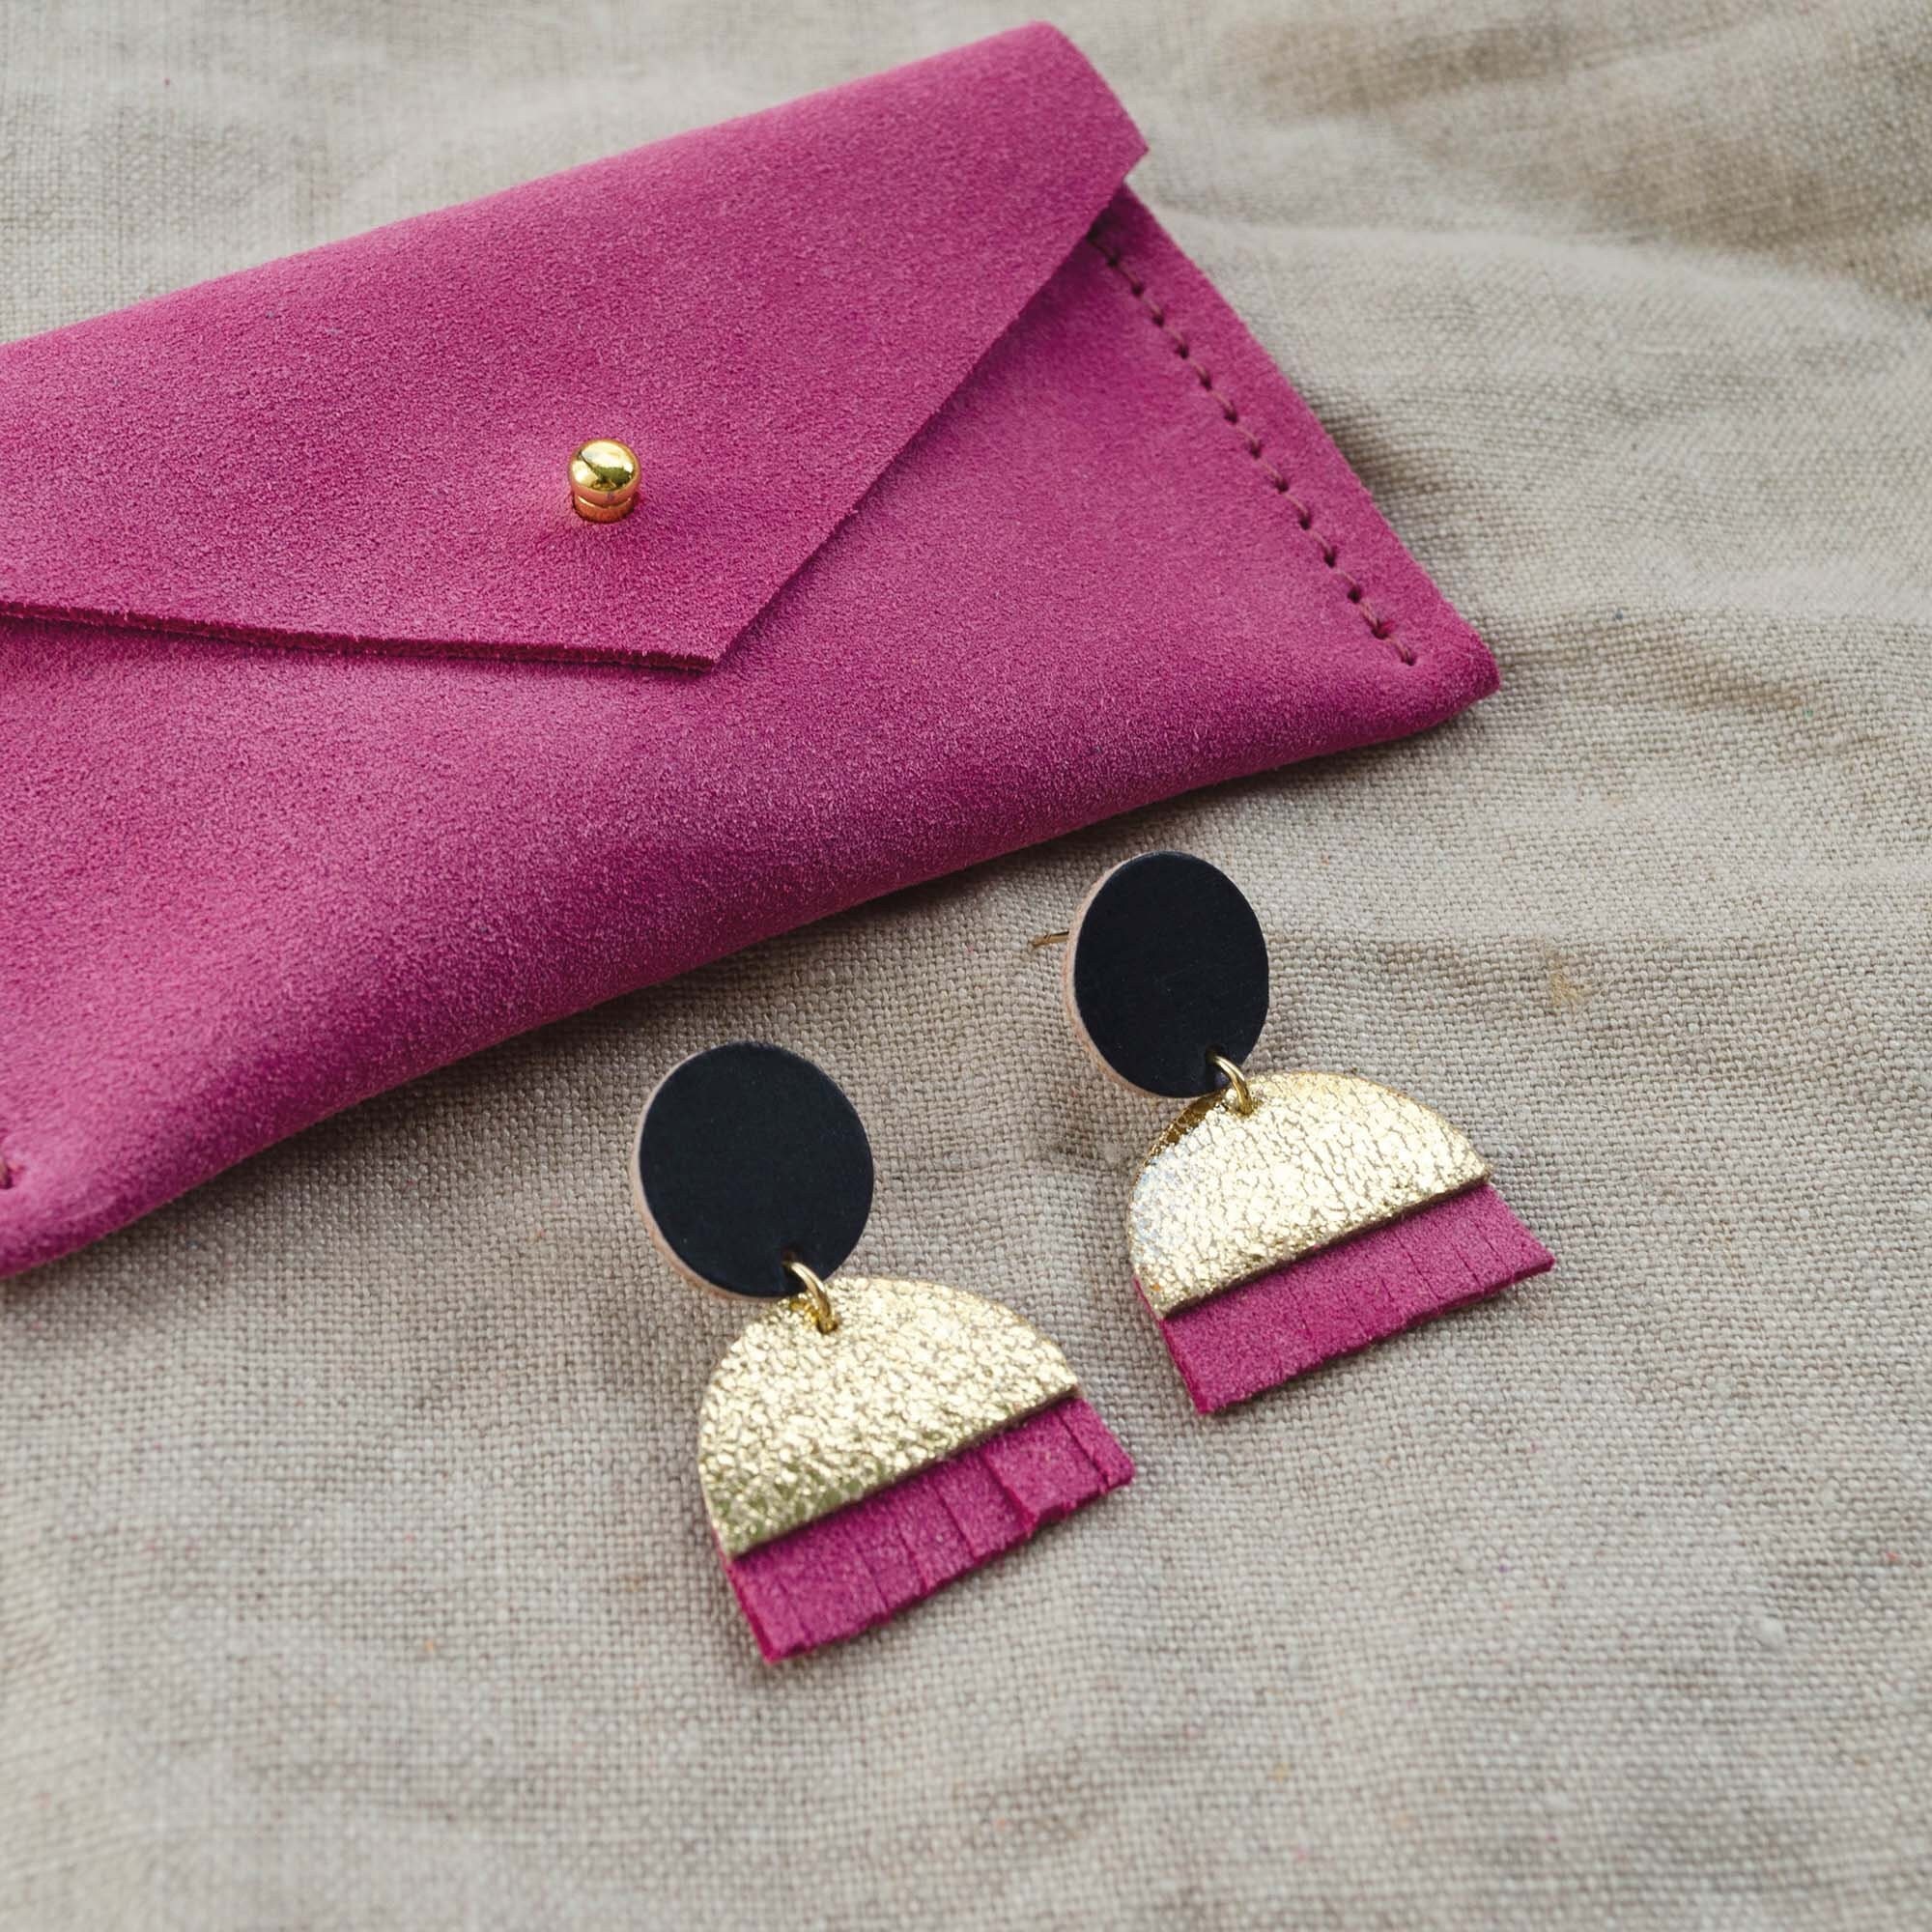 Pink Sunset Drop Earrings. Recycled Leather Stud Earrings. Geometric Tassel Gift For Bridesmaids. Clip On Earrings